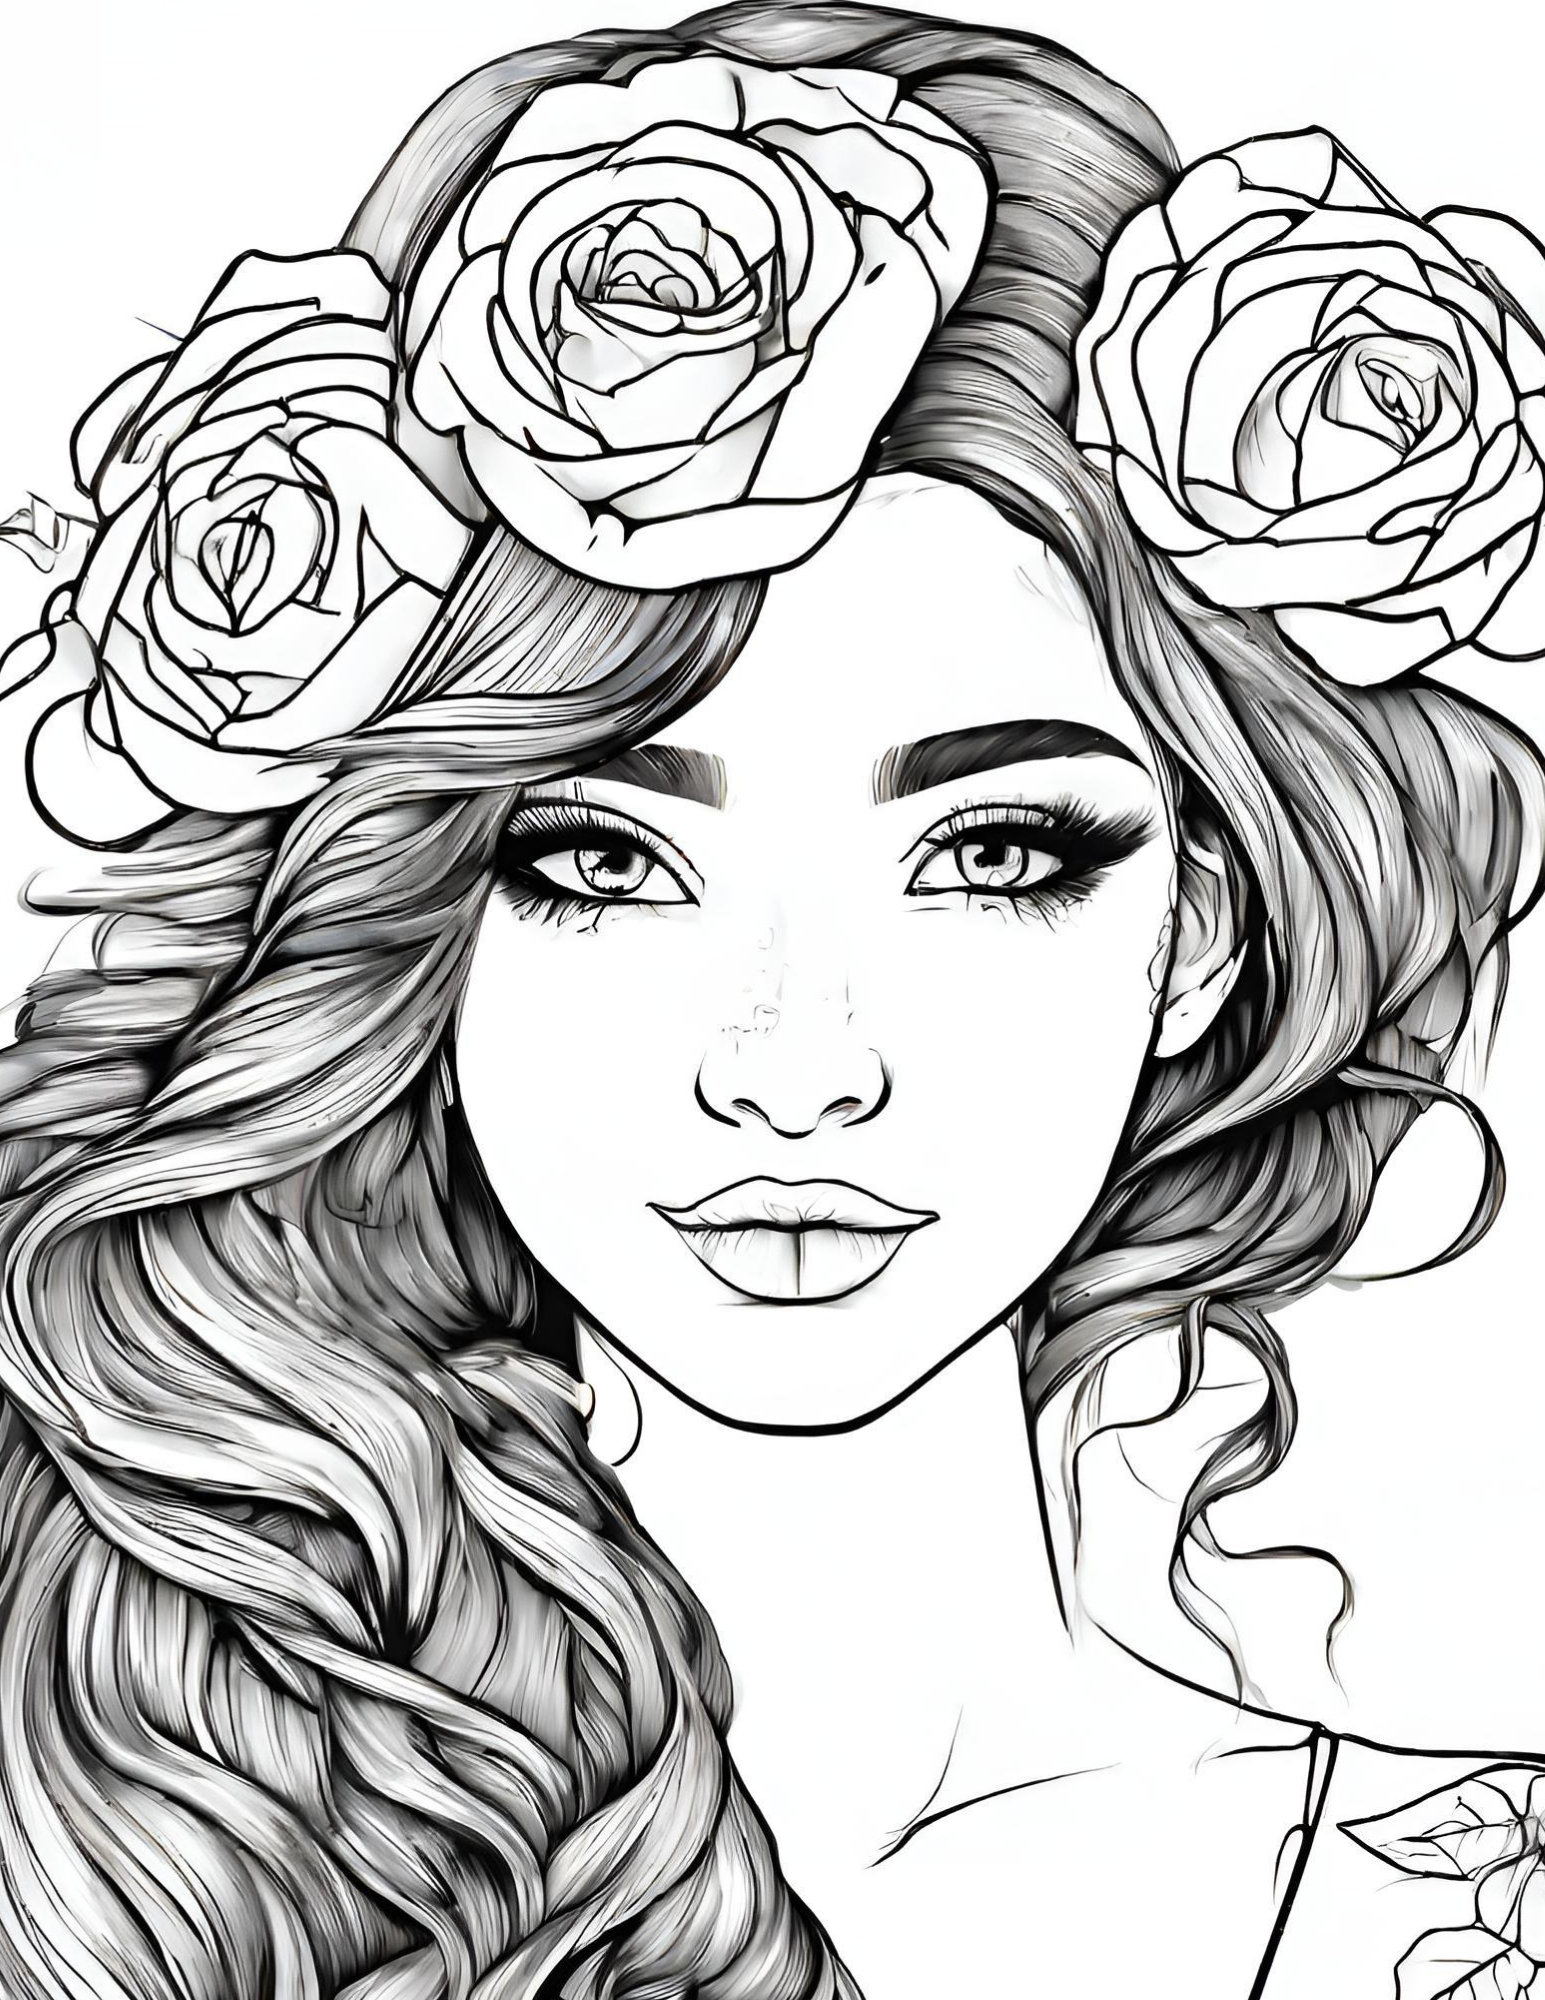 Girl 's Rose Hair Style, Adult Colouring - Etsy